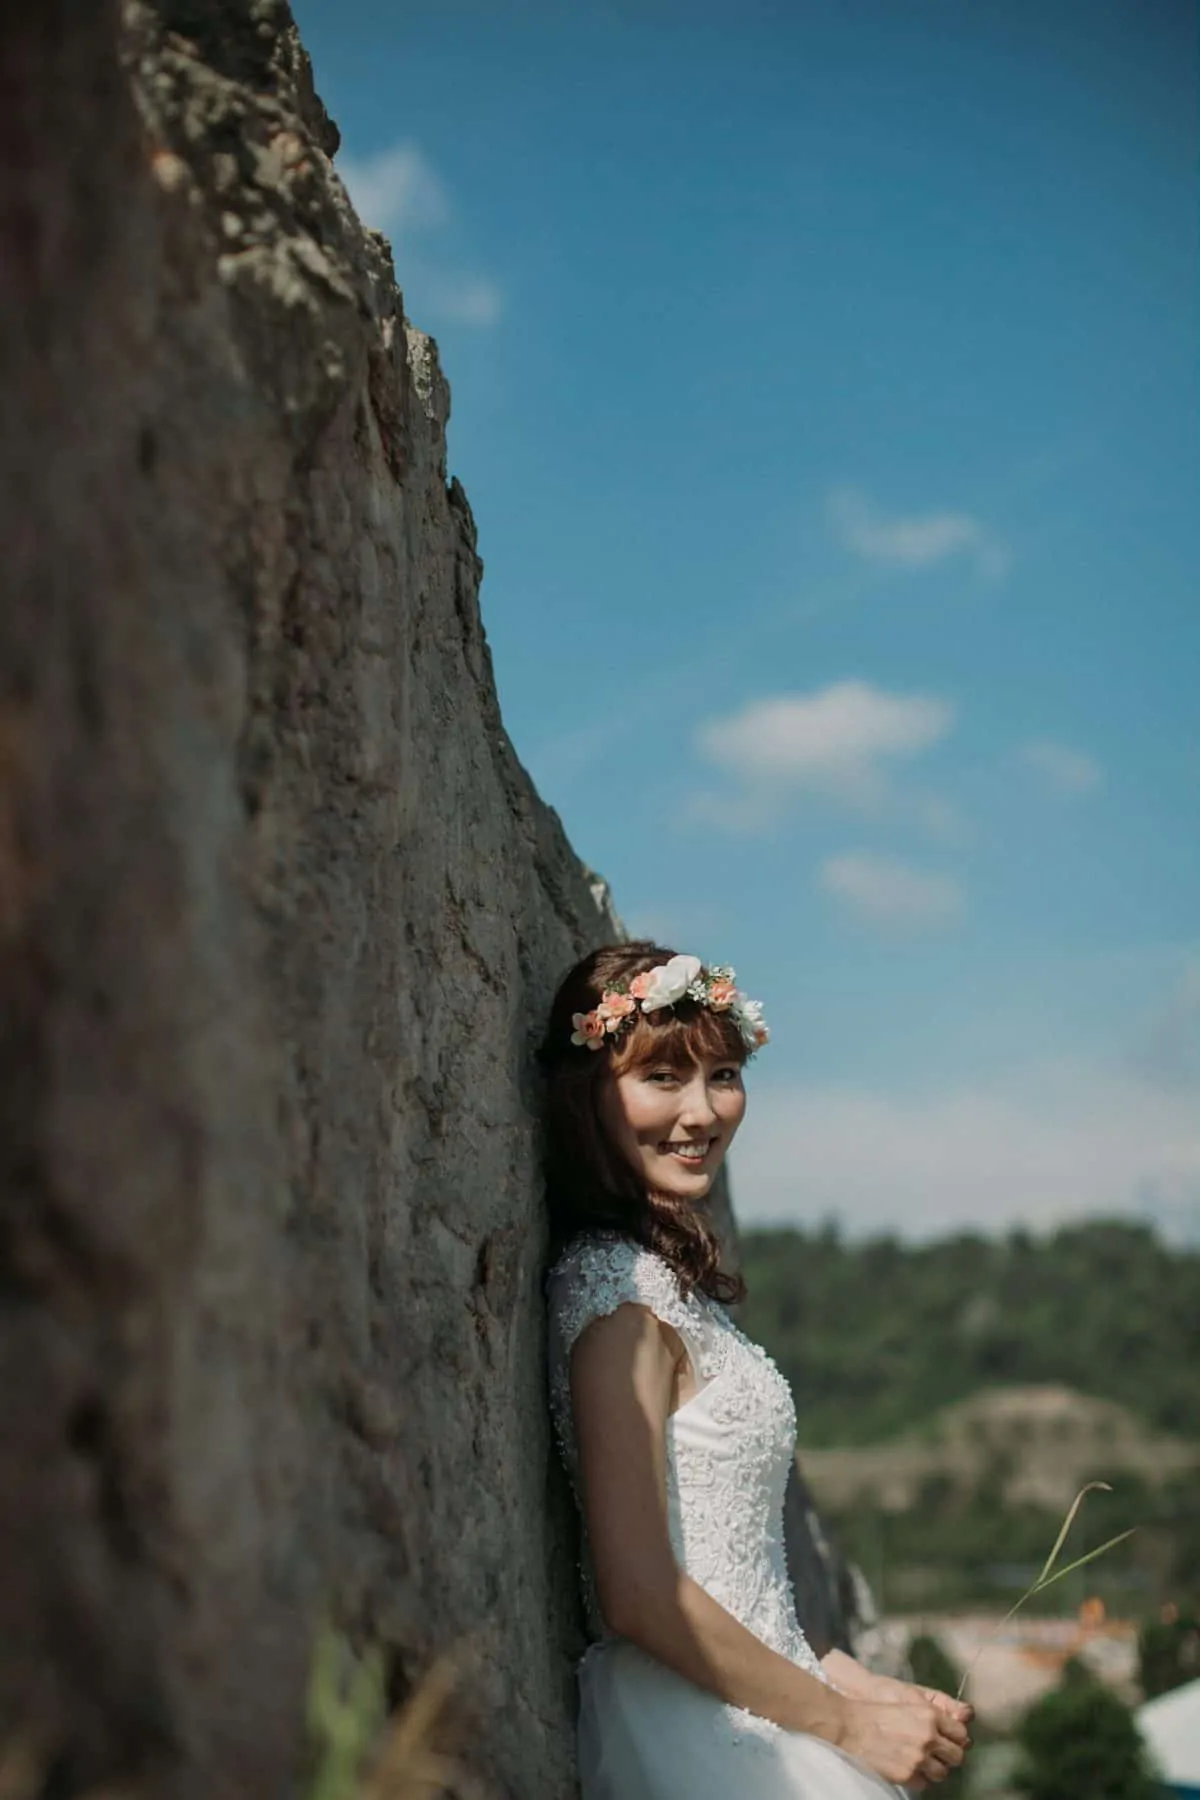 cliff choong destination portrait and wedding photographer malaysia kuala lumpur prewedding sunset golden sunrise shots bride and groom mountain in the city couple kiss romantic intimate moment scene couple woods casual couple portrait outdoor shots